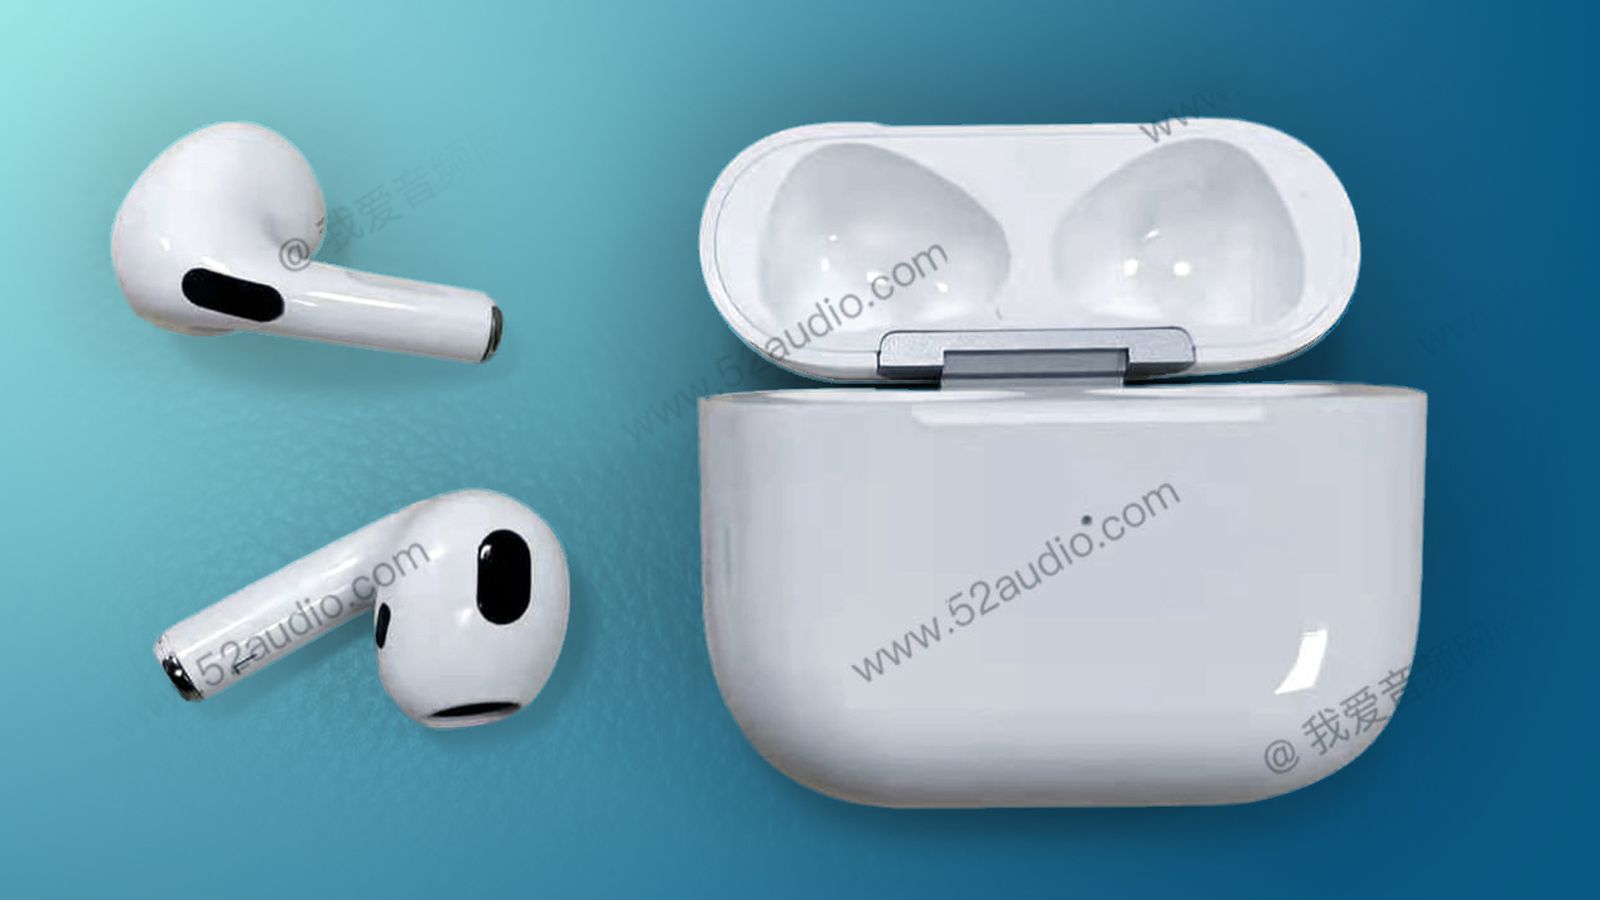 Redesigned future AirPods 3 shown in new images